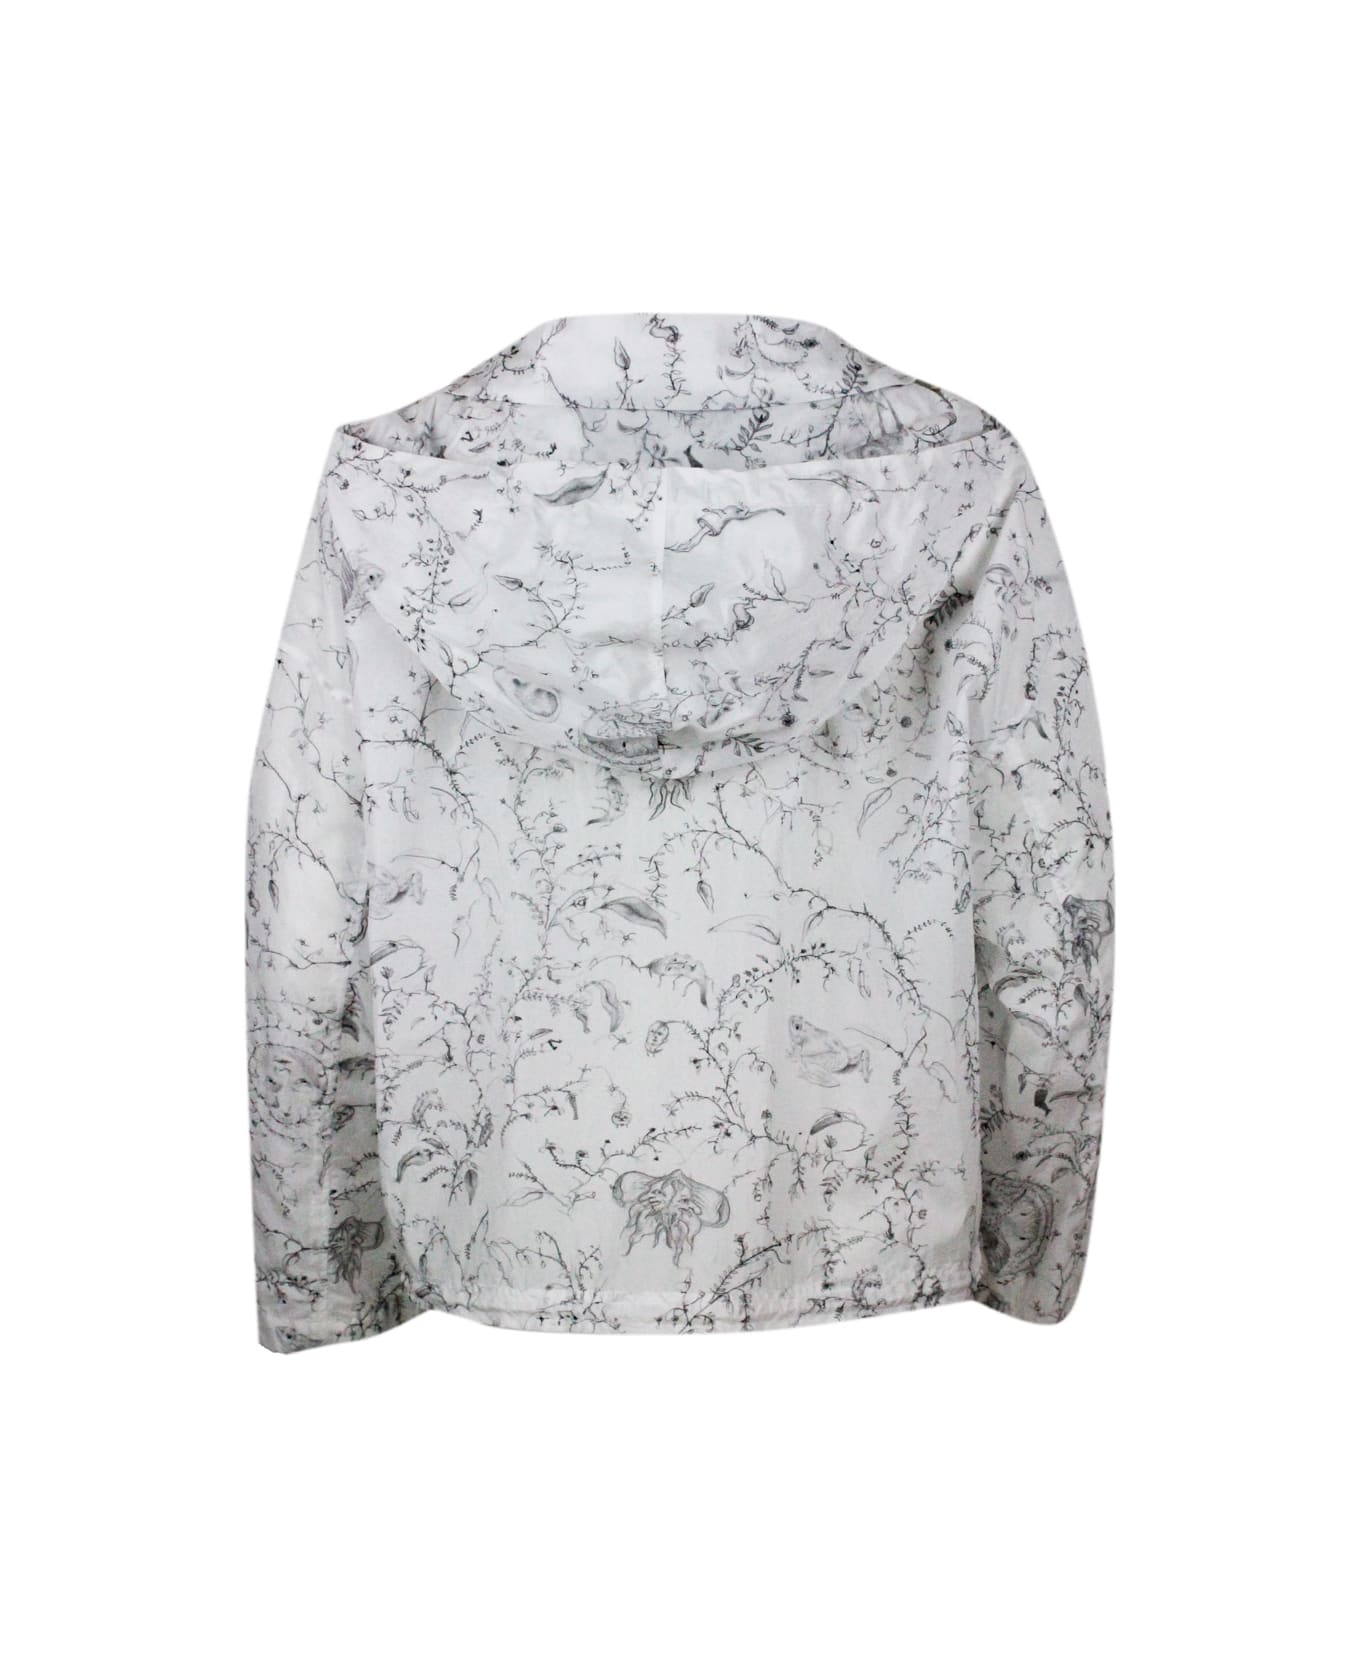 Fabiana Filippi Windproof Jacket In Light Nylon With Hood And Button Closure In Branch Pattern Print - White